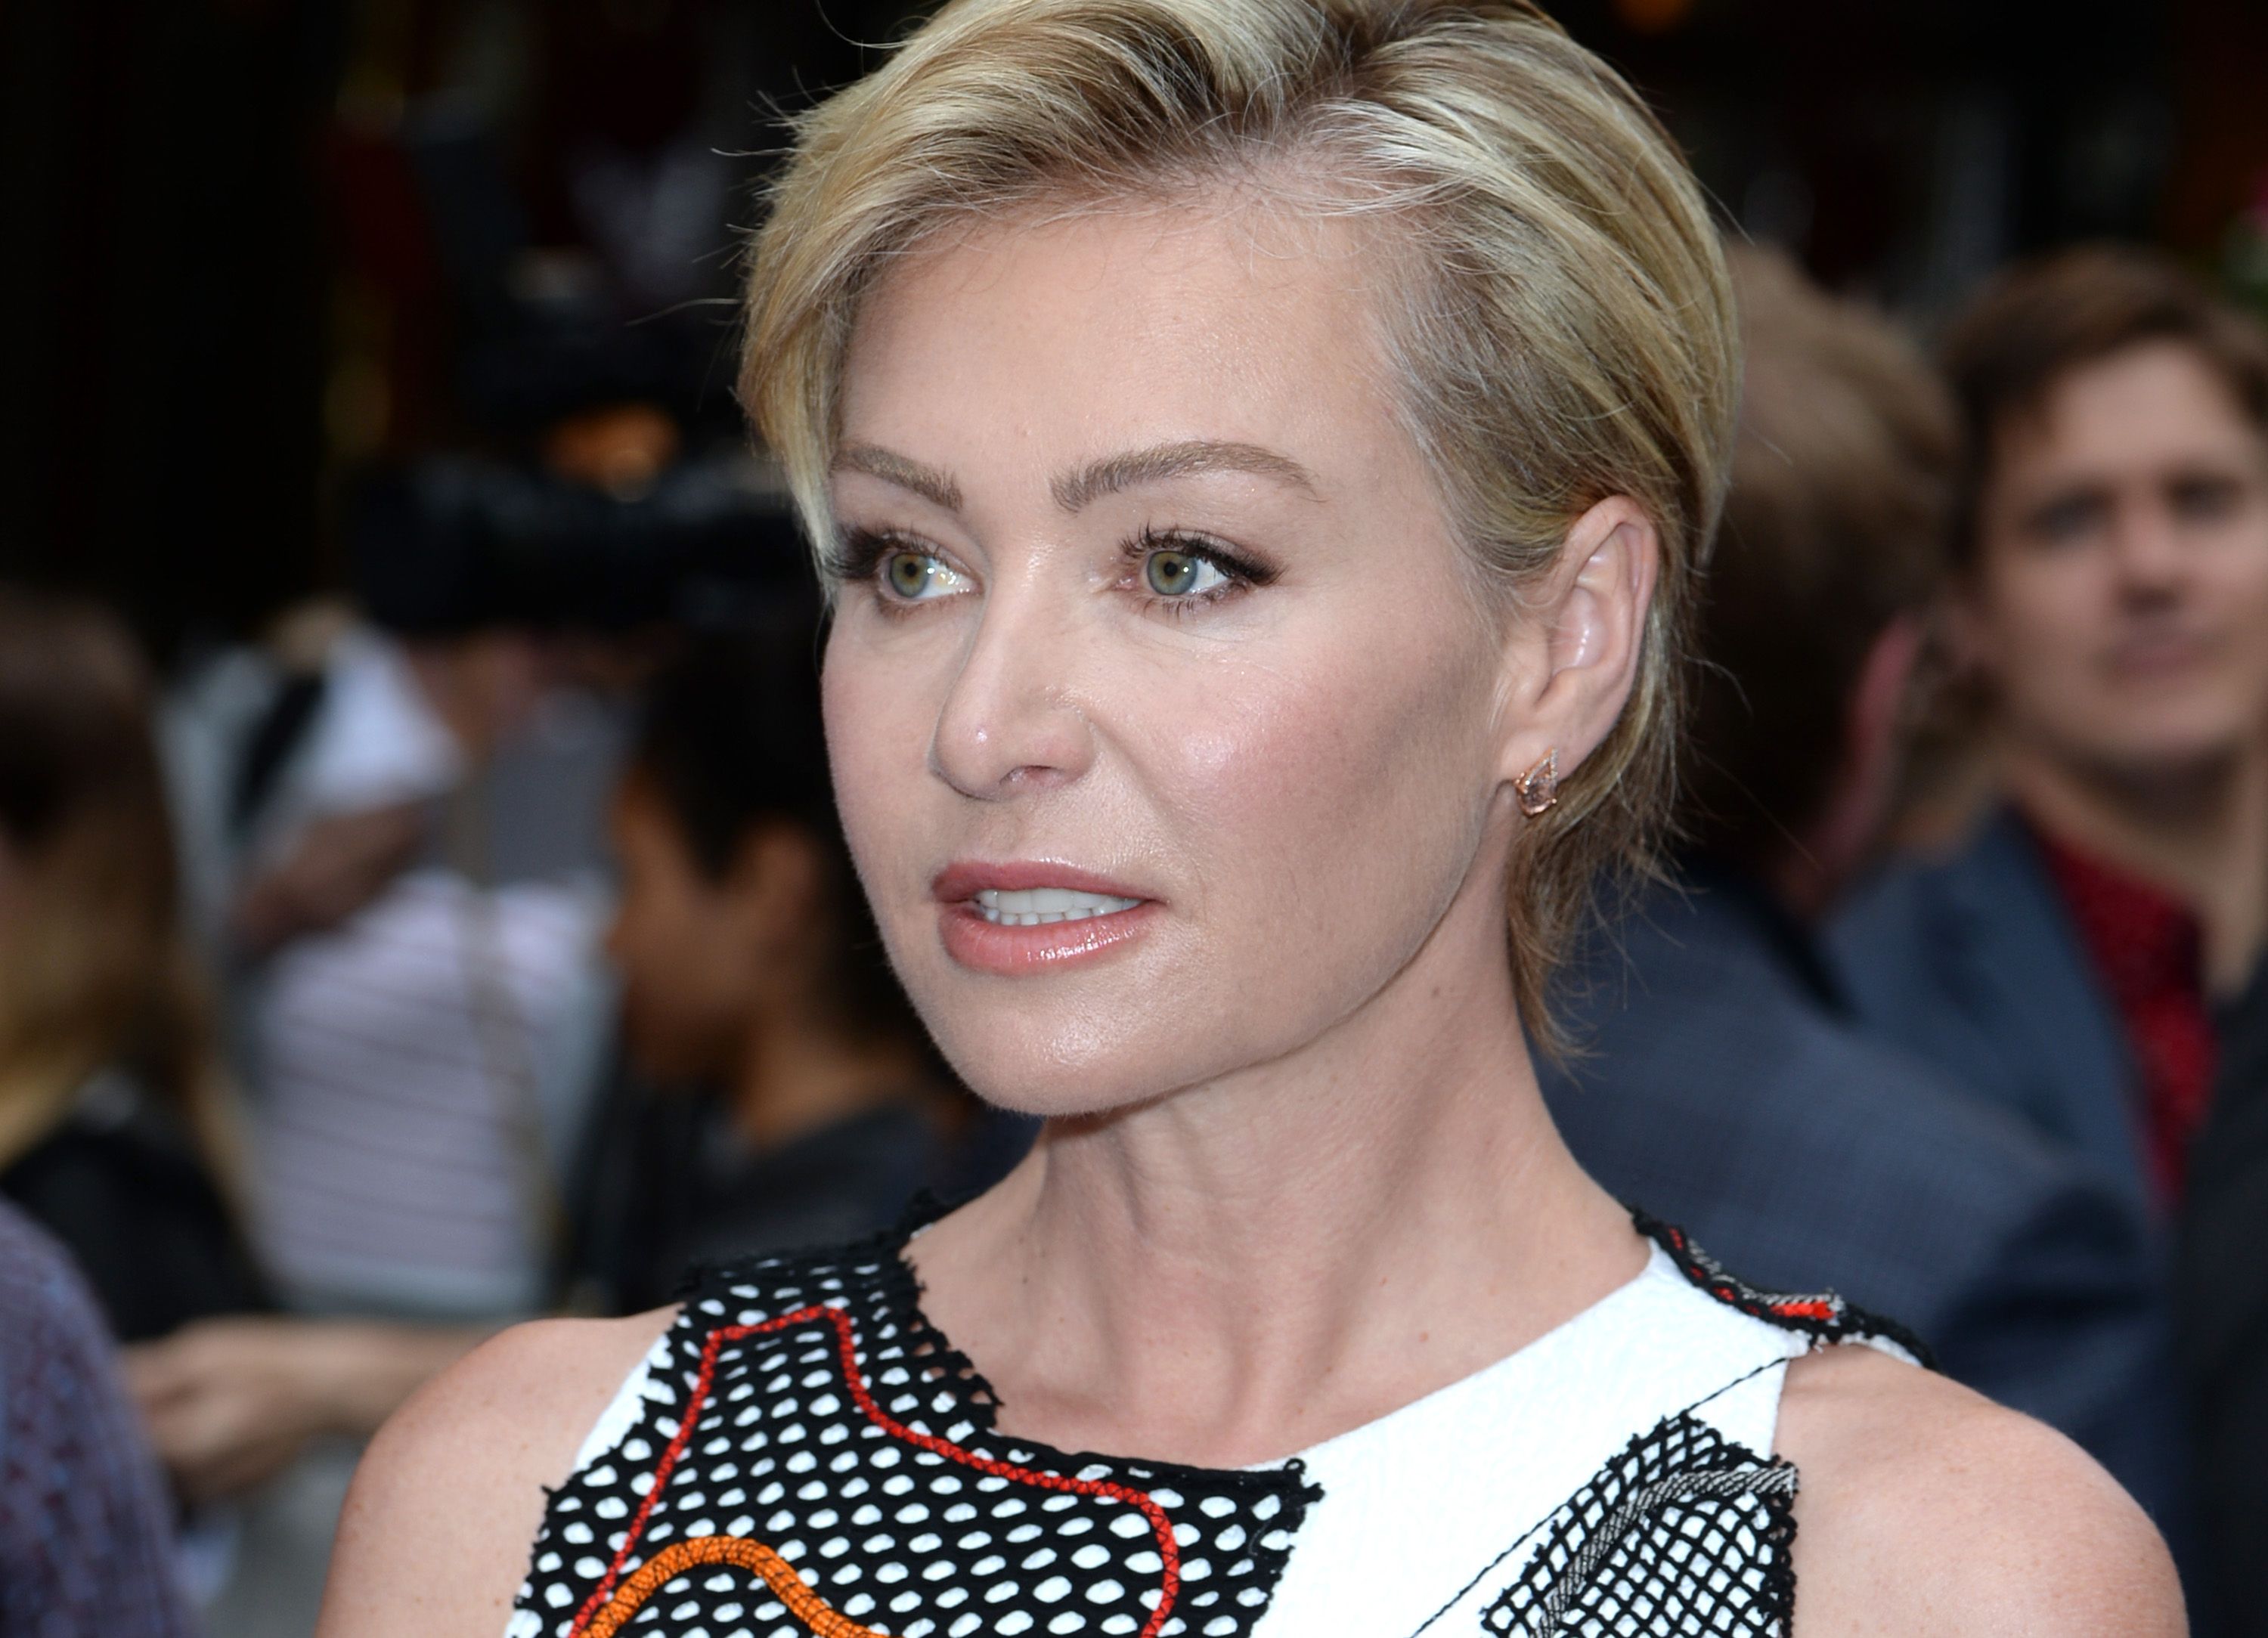 Portia de Rossi at the UK Premiere of "Finding Dory" at Odeon Leicester Square on July 10, 2016 in London, England. | Source: Getty Images